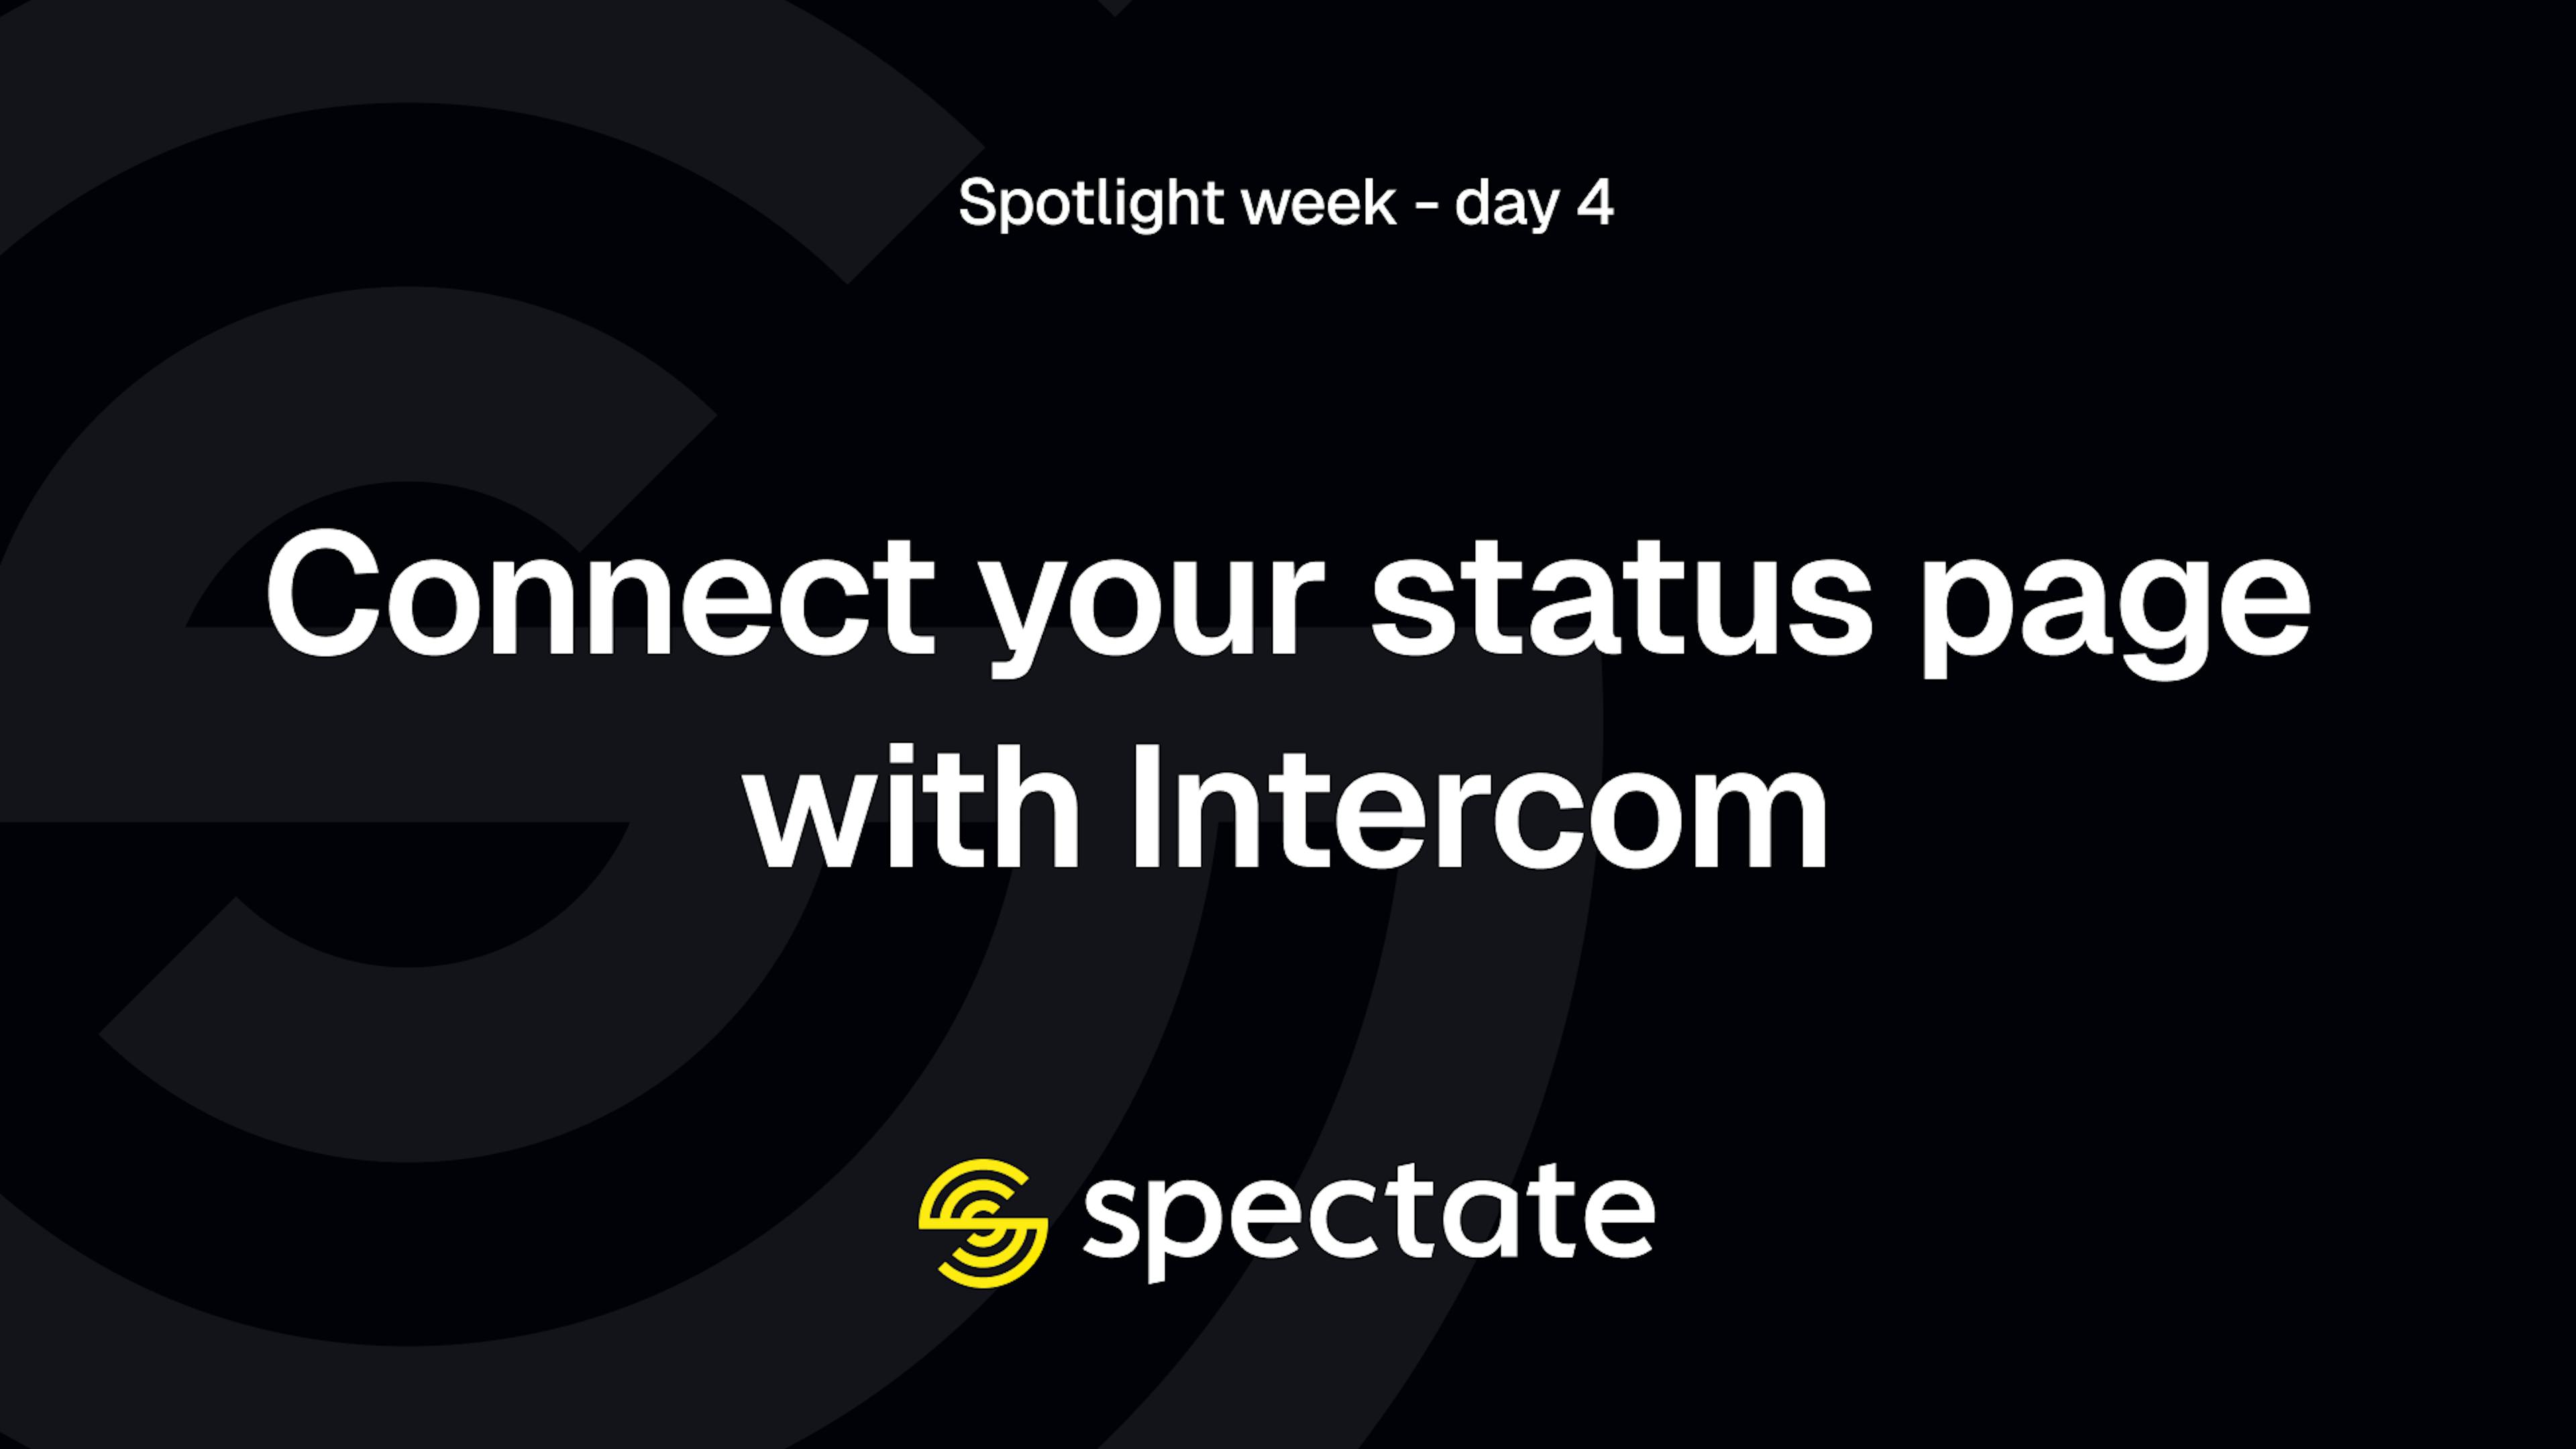 Spotlight week day 4: Connect your status page with Intercom